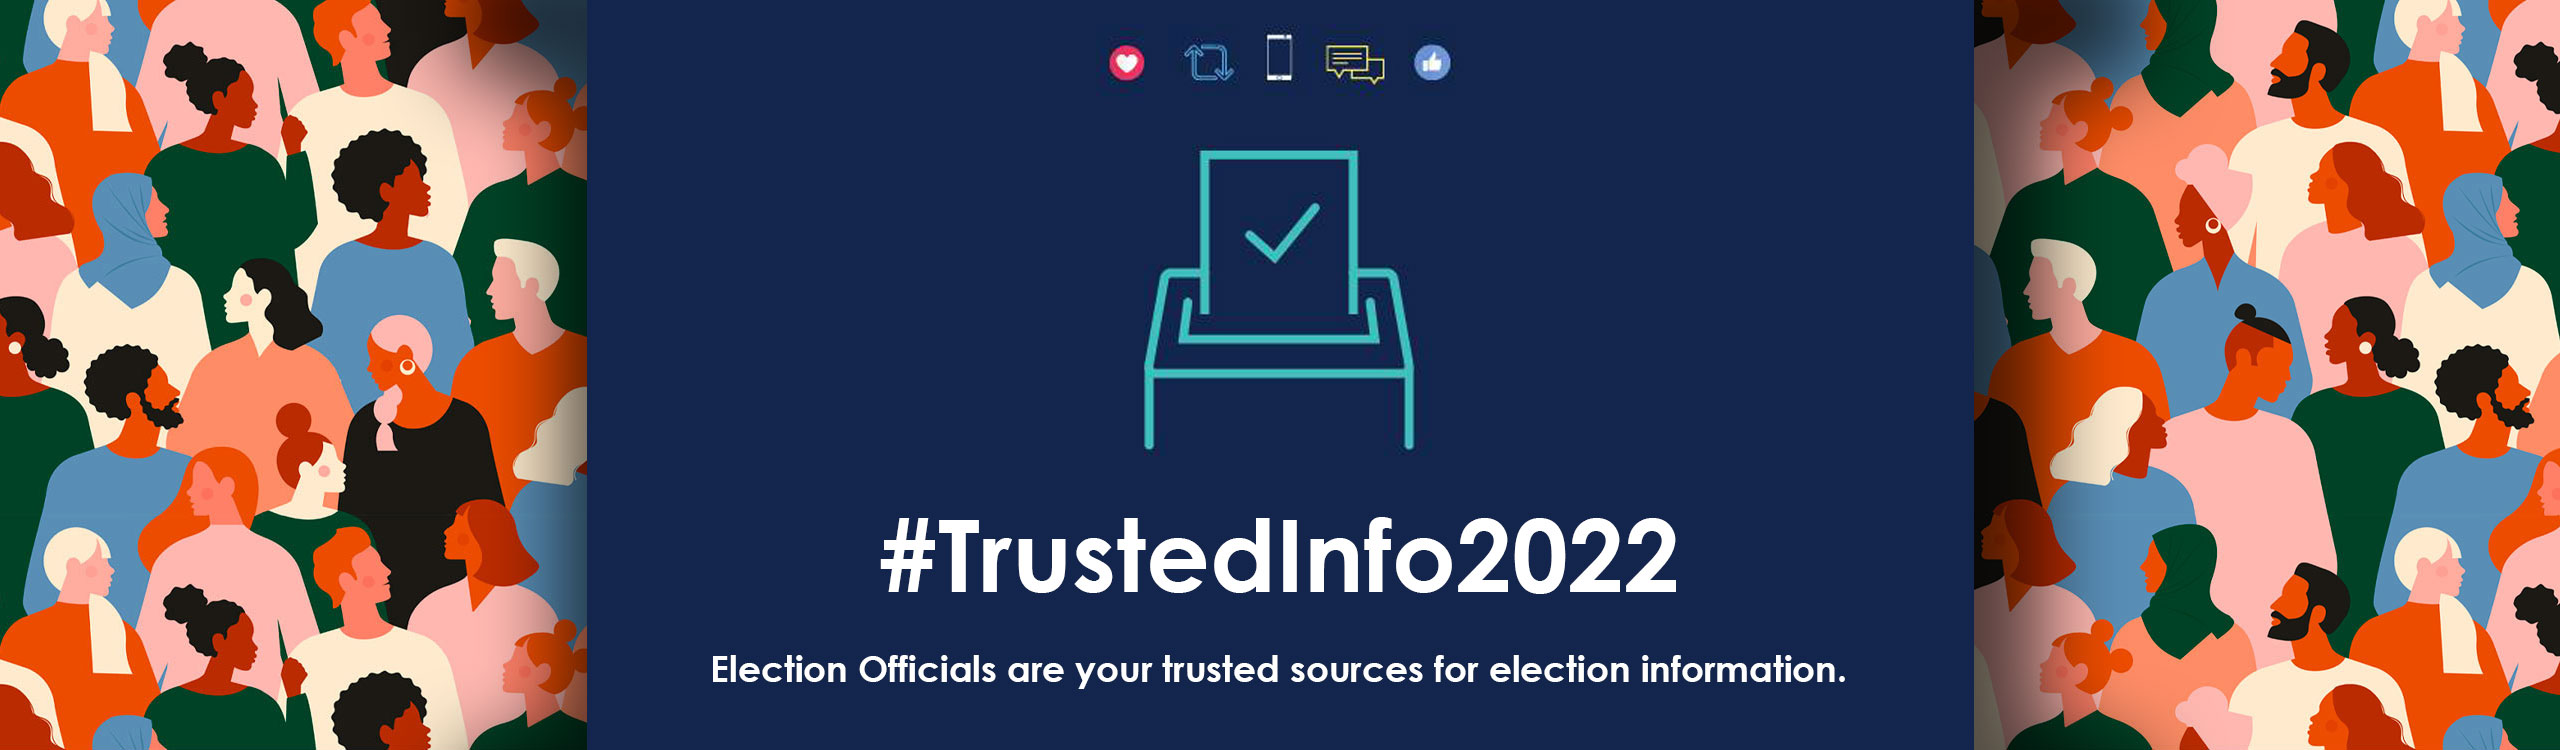 #TrustedInfo2022 graphic, Election Officials are your trusted sources for election information.